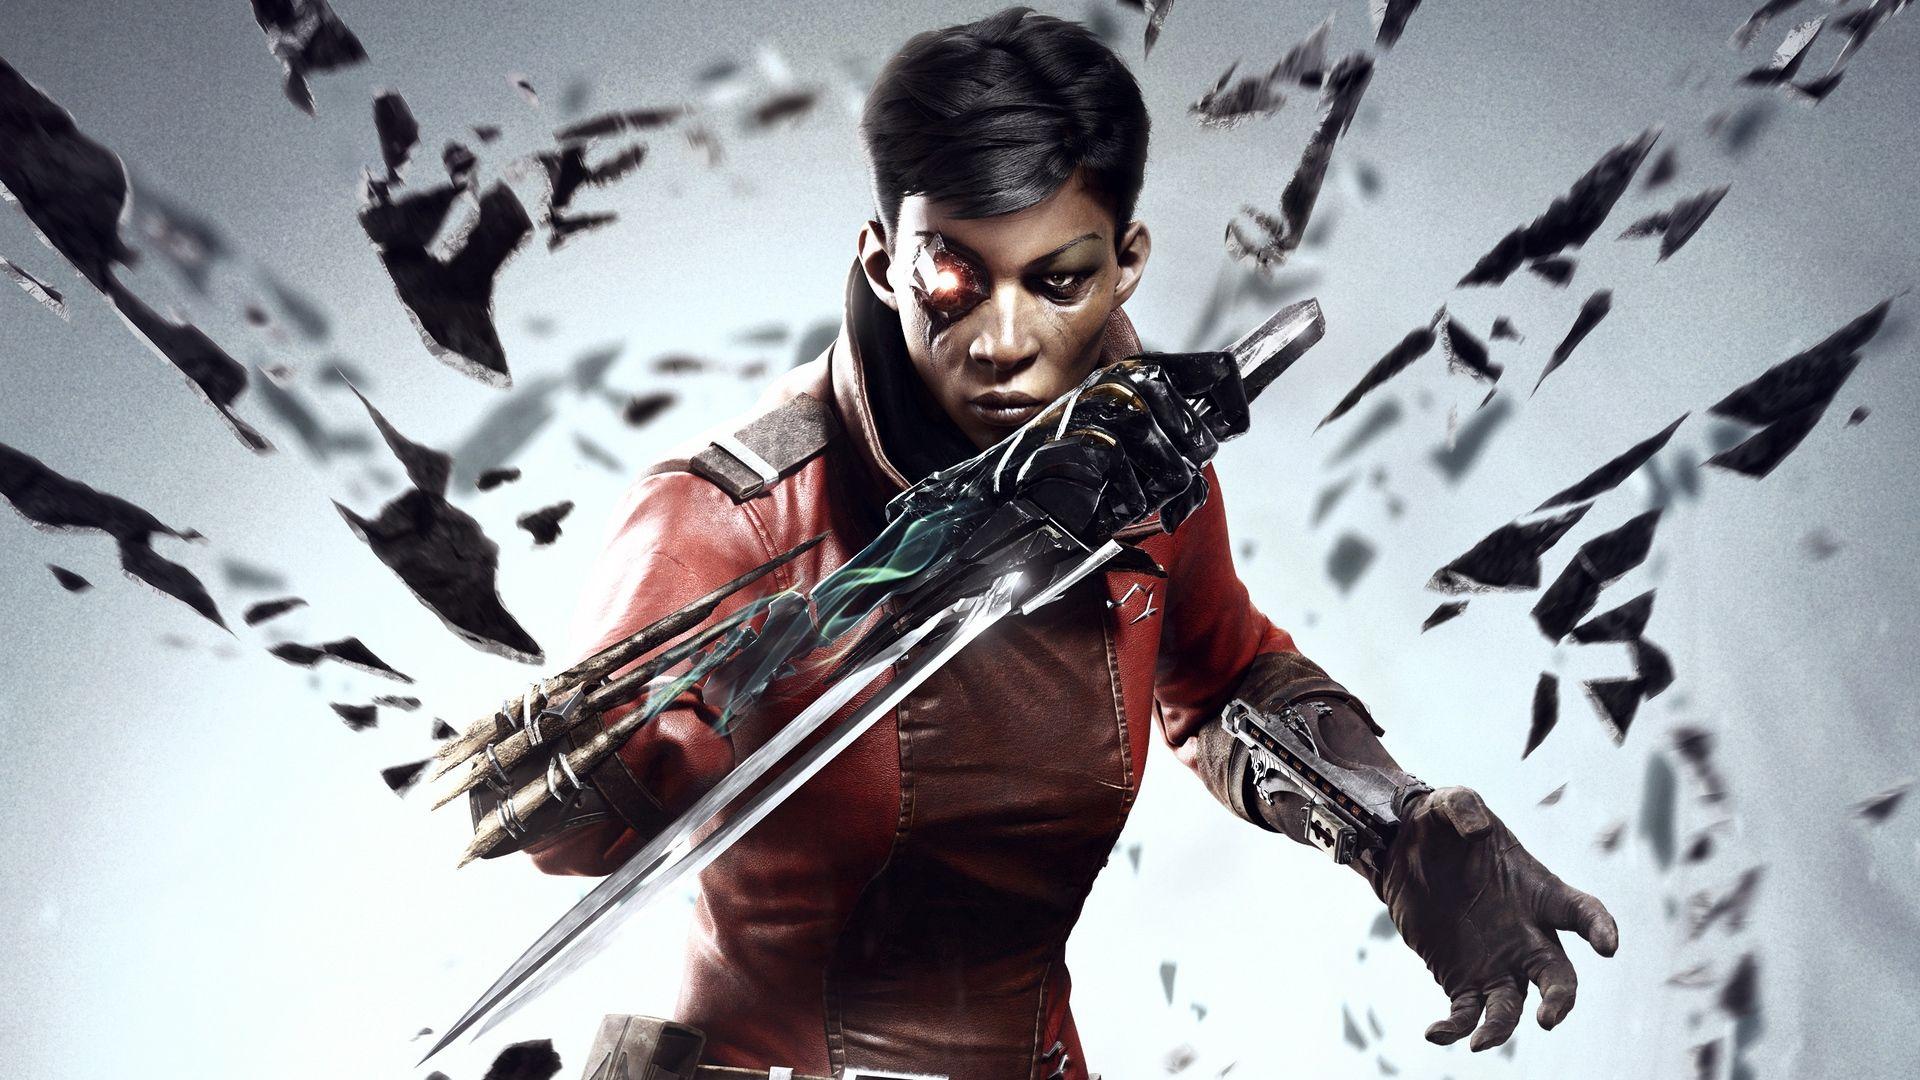 Dishonored: Death of the Outsider (Game) Wallpaper